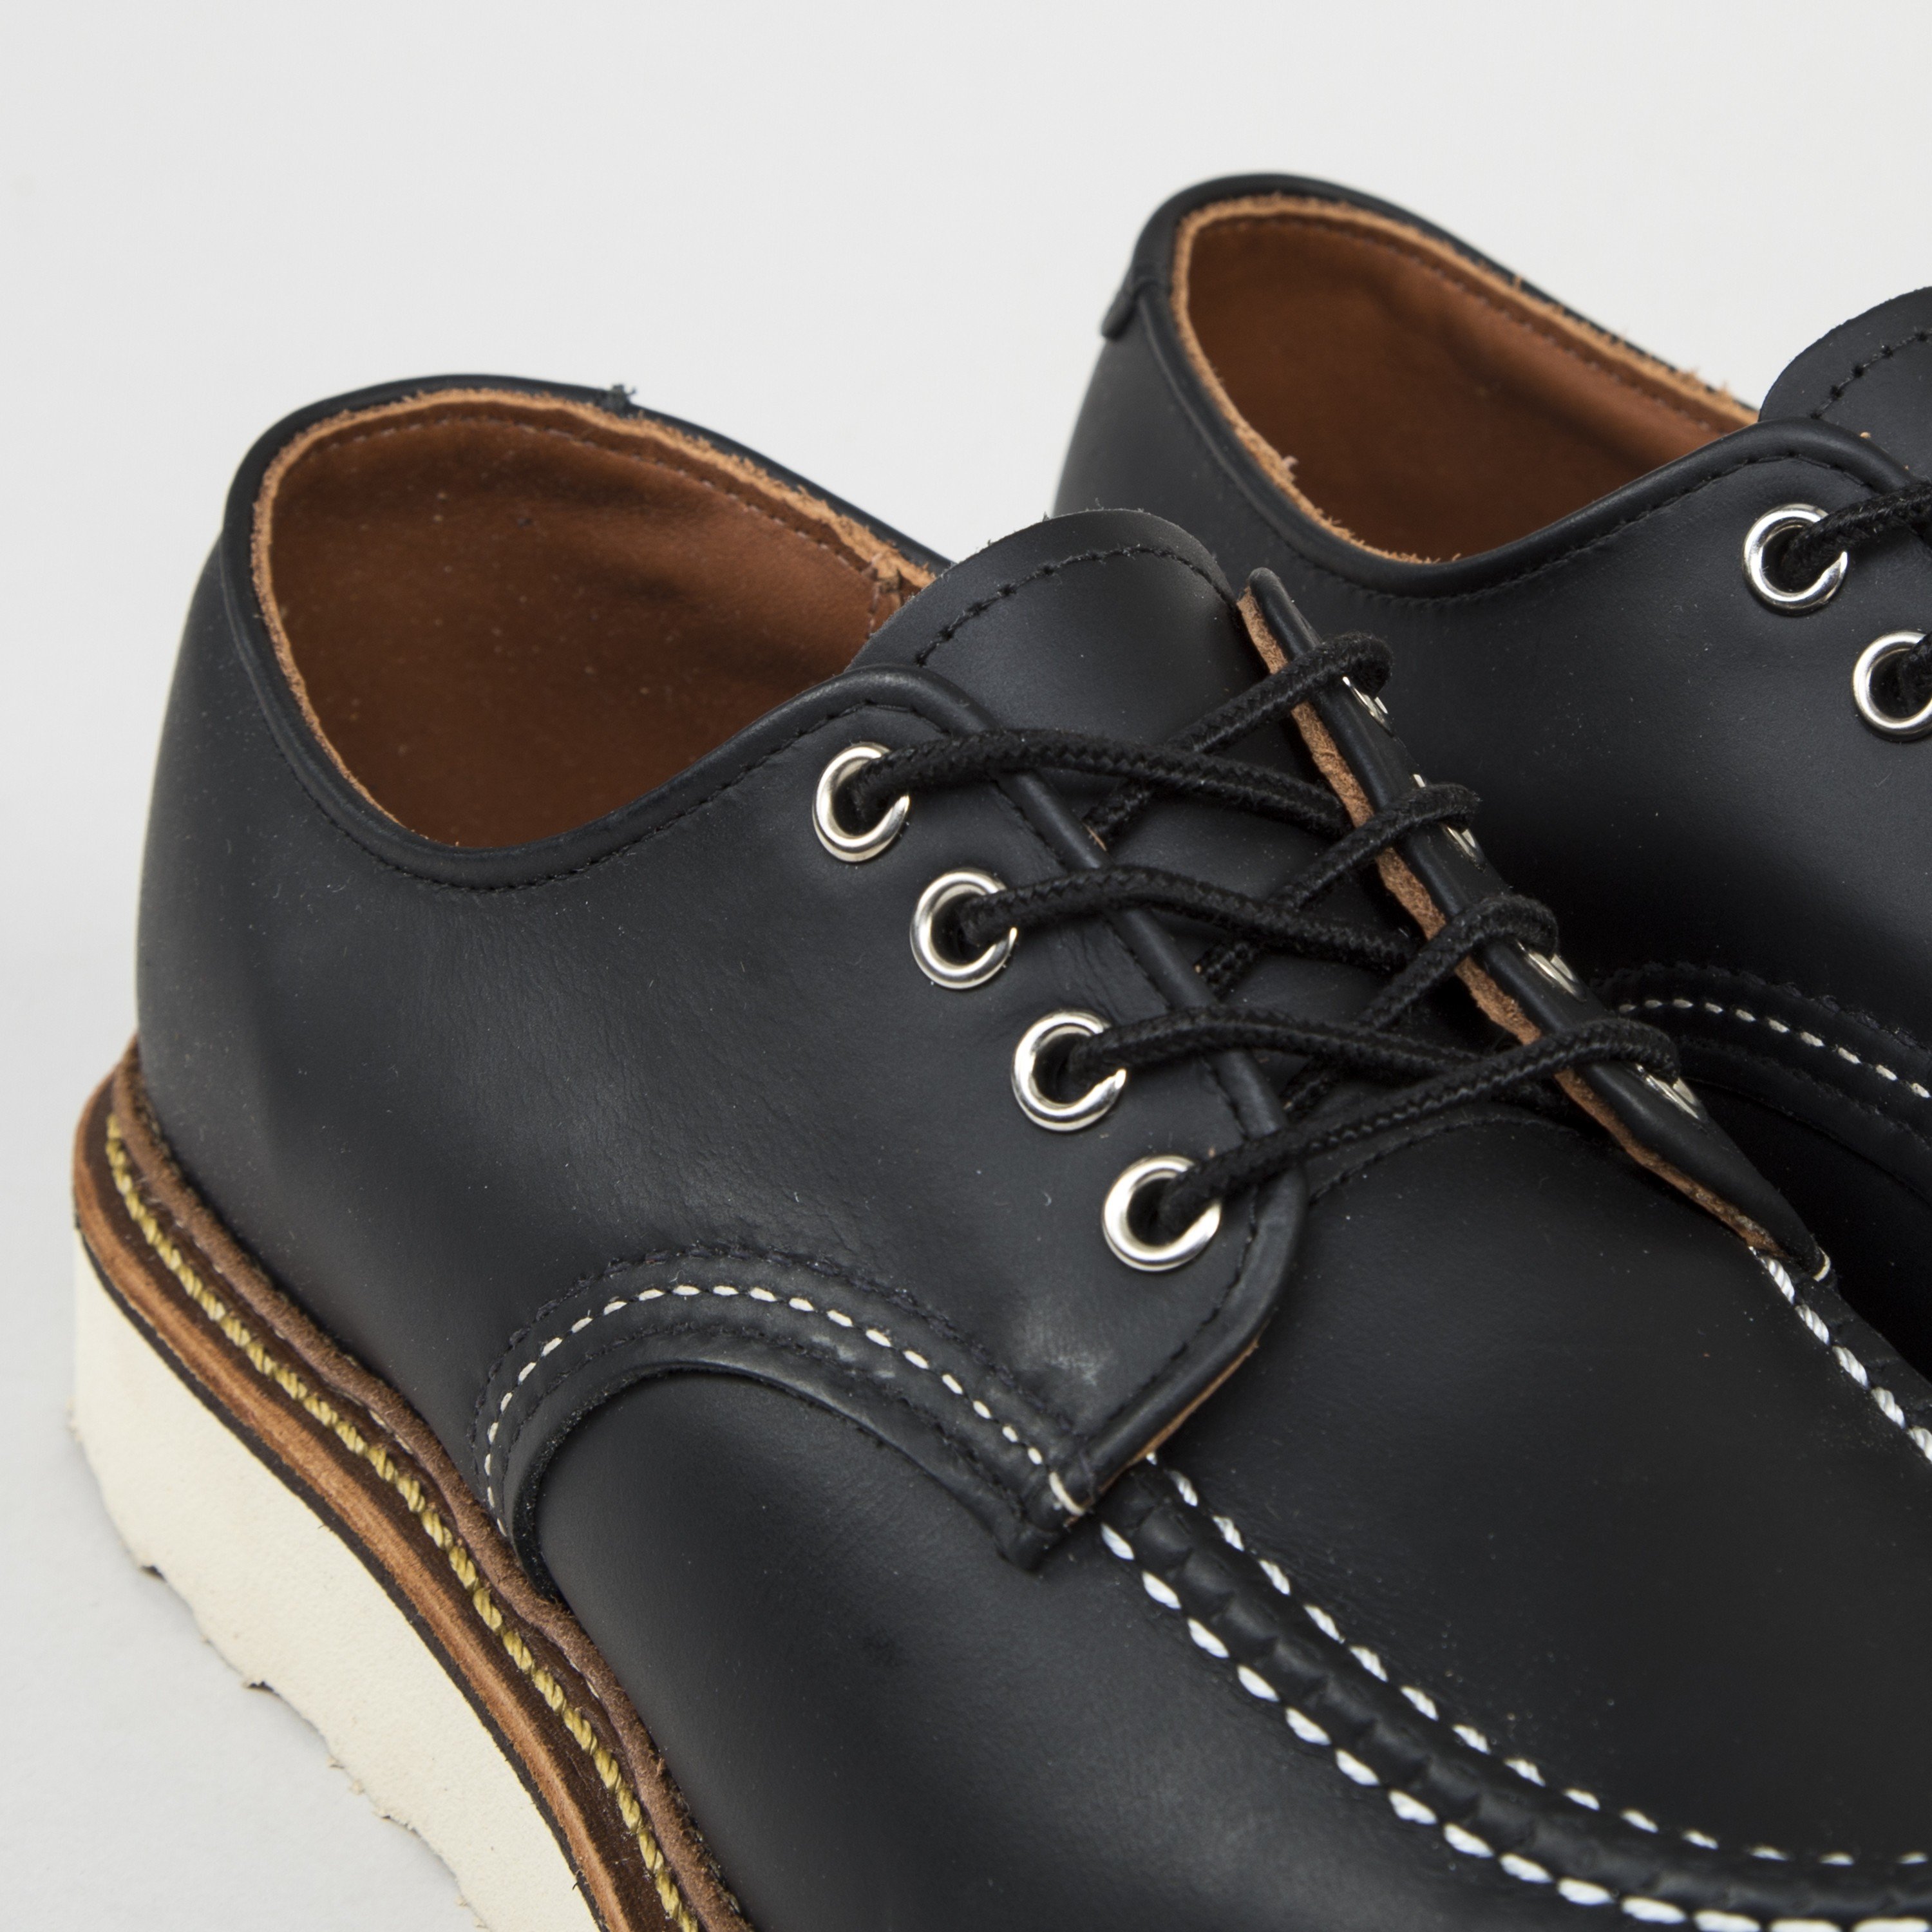 Red Wing 8106 Classic Oxford Moc Toe Shoes (Black Chrome Leather ...